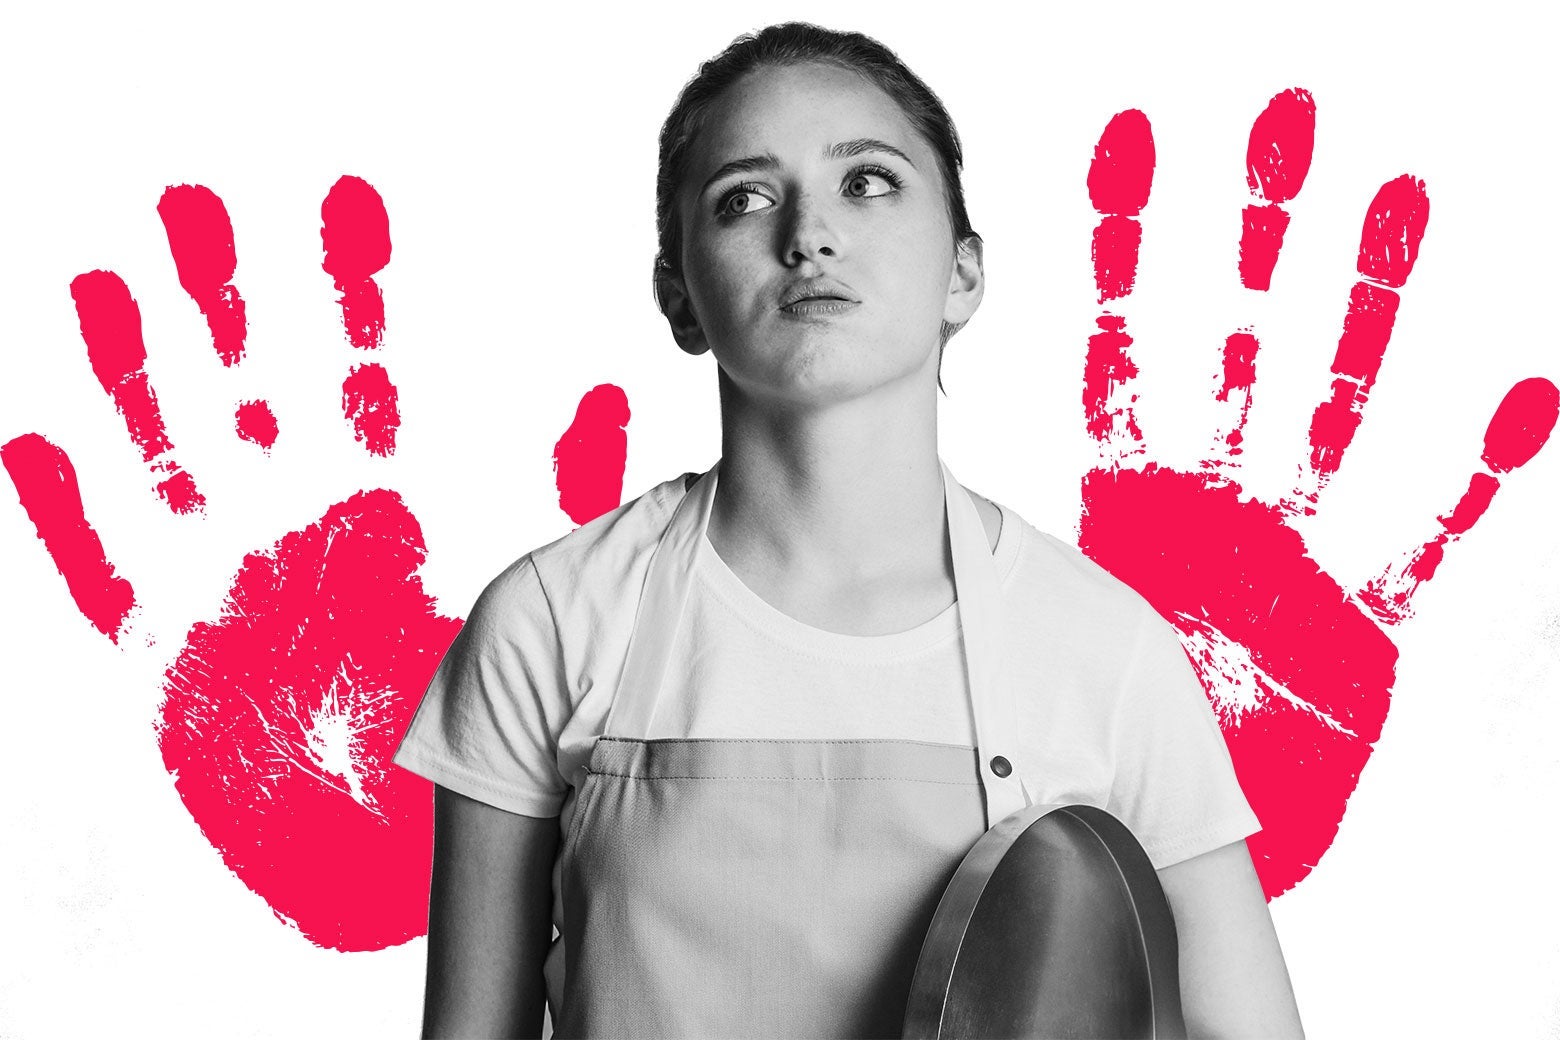 A teenage girl wearing an apron and holding a tray, and a graphic of handprints behind her.